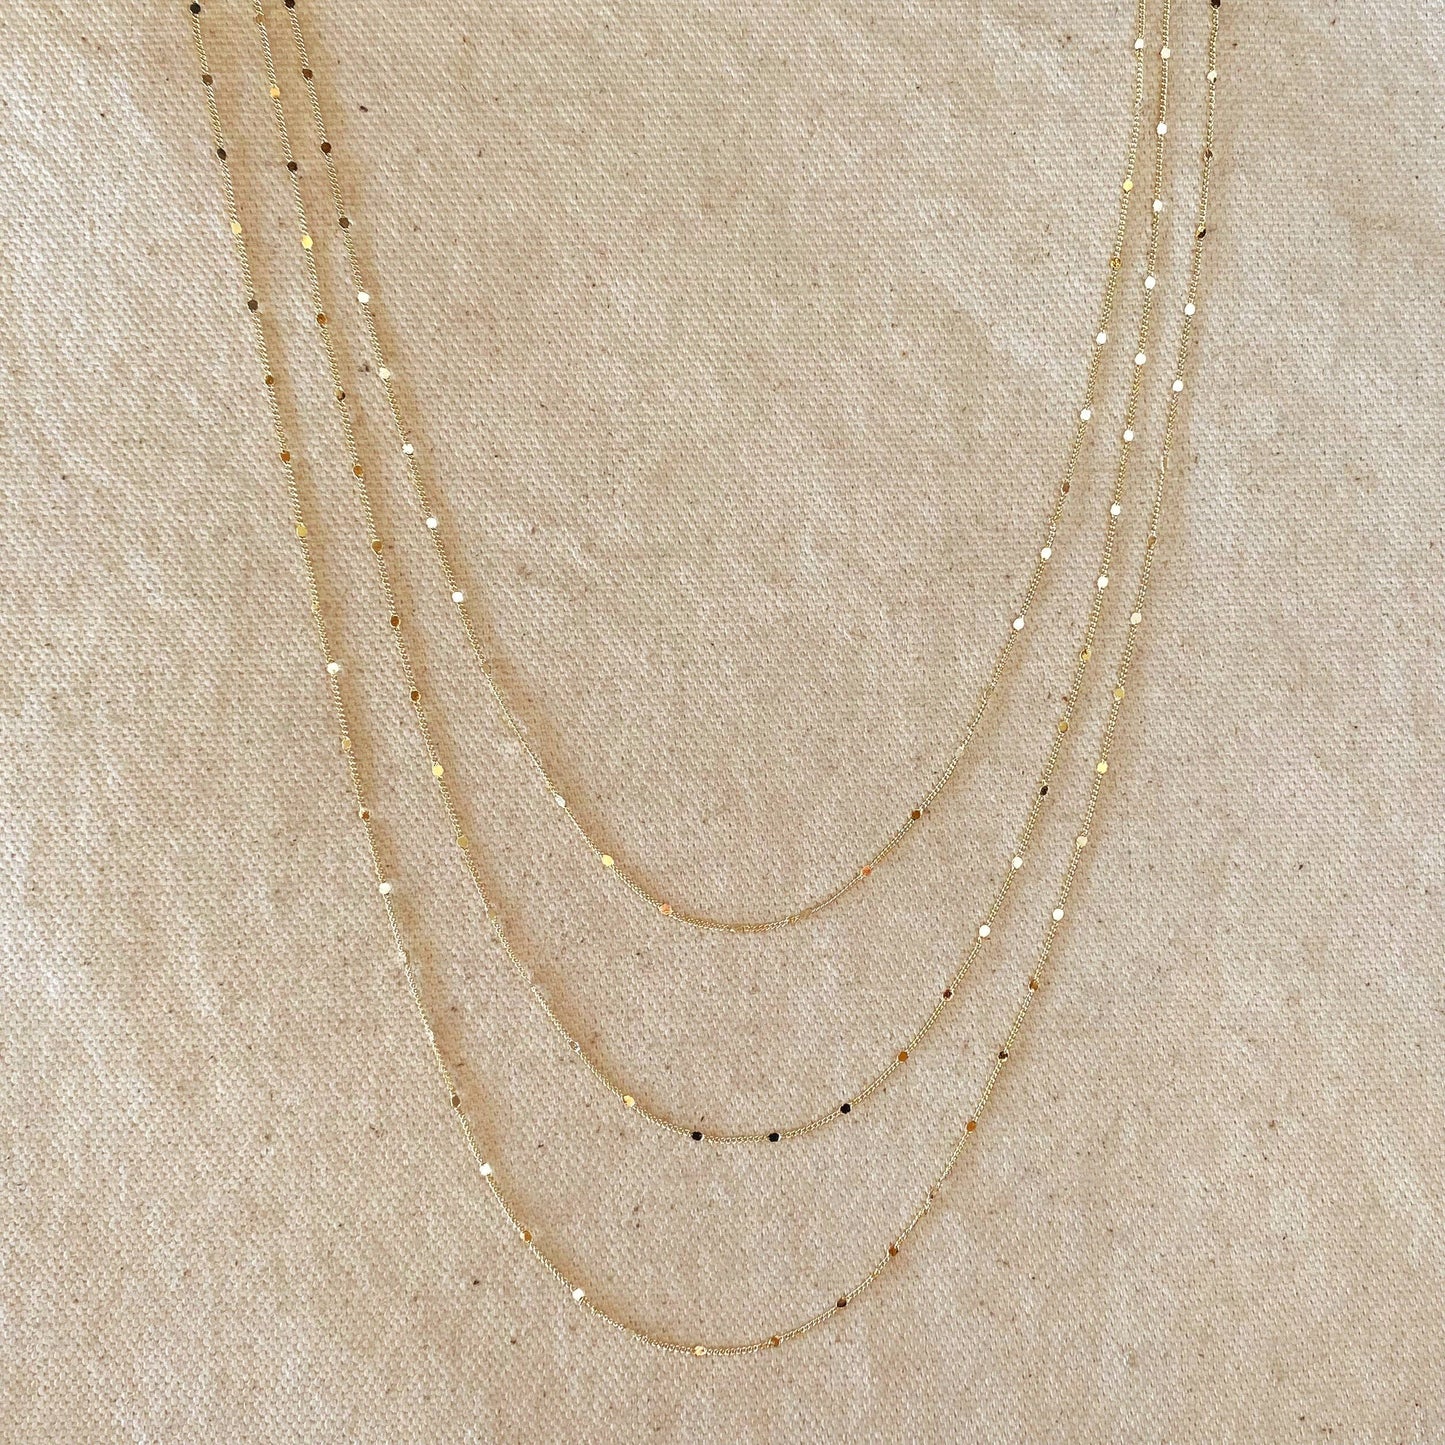 Pressed Curb Chain Necklace